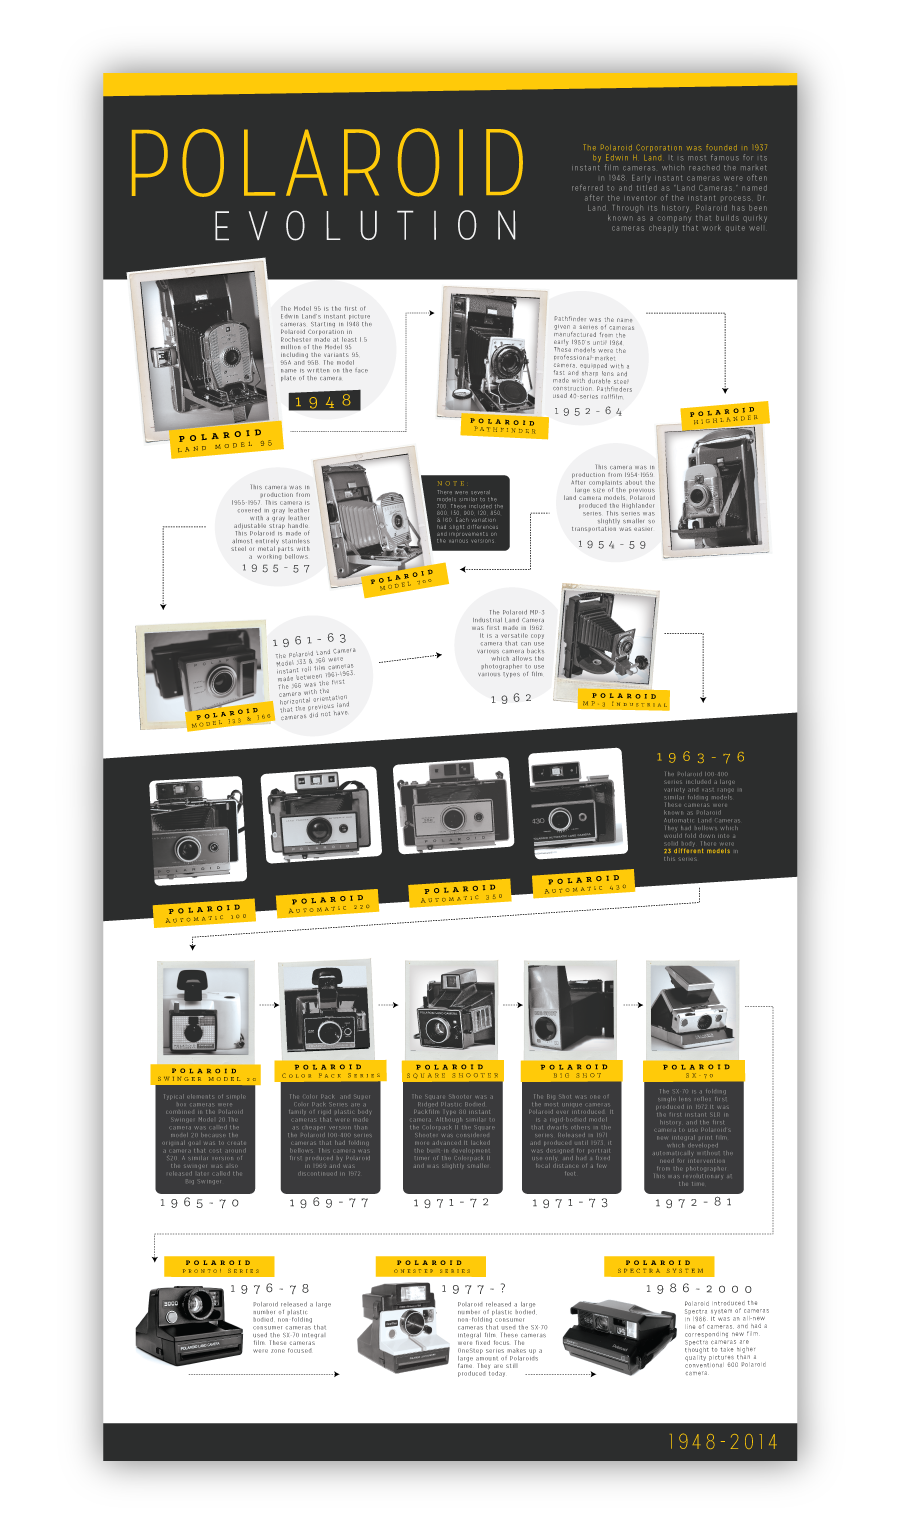 POLAROID history poster timeline infographic student